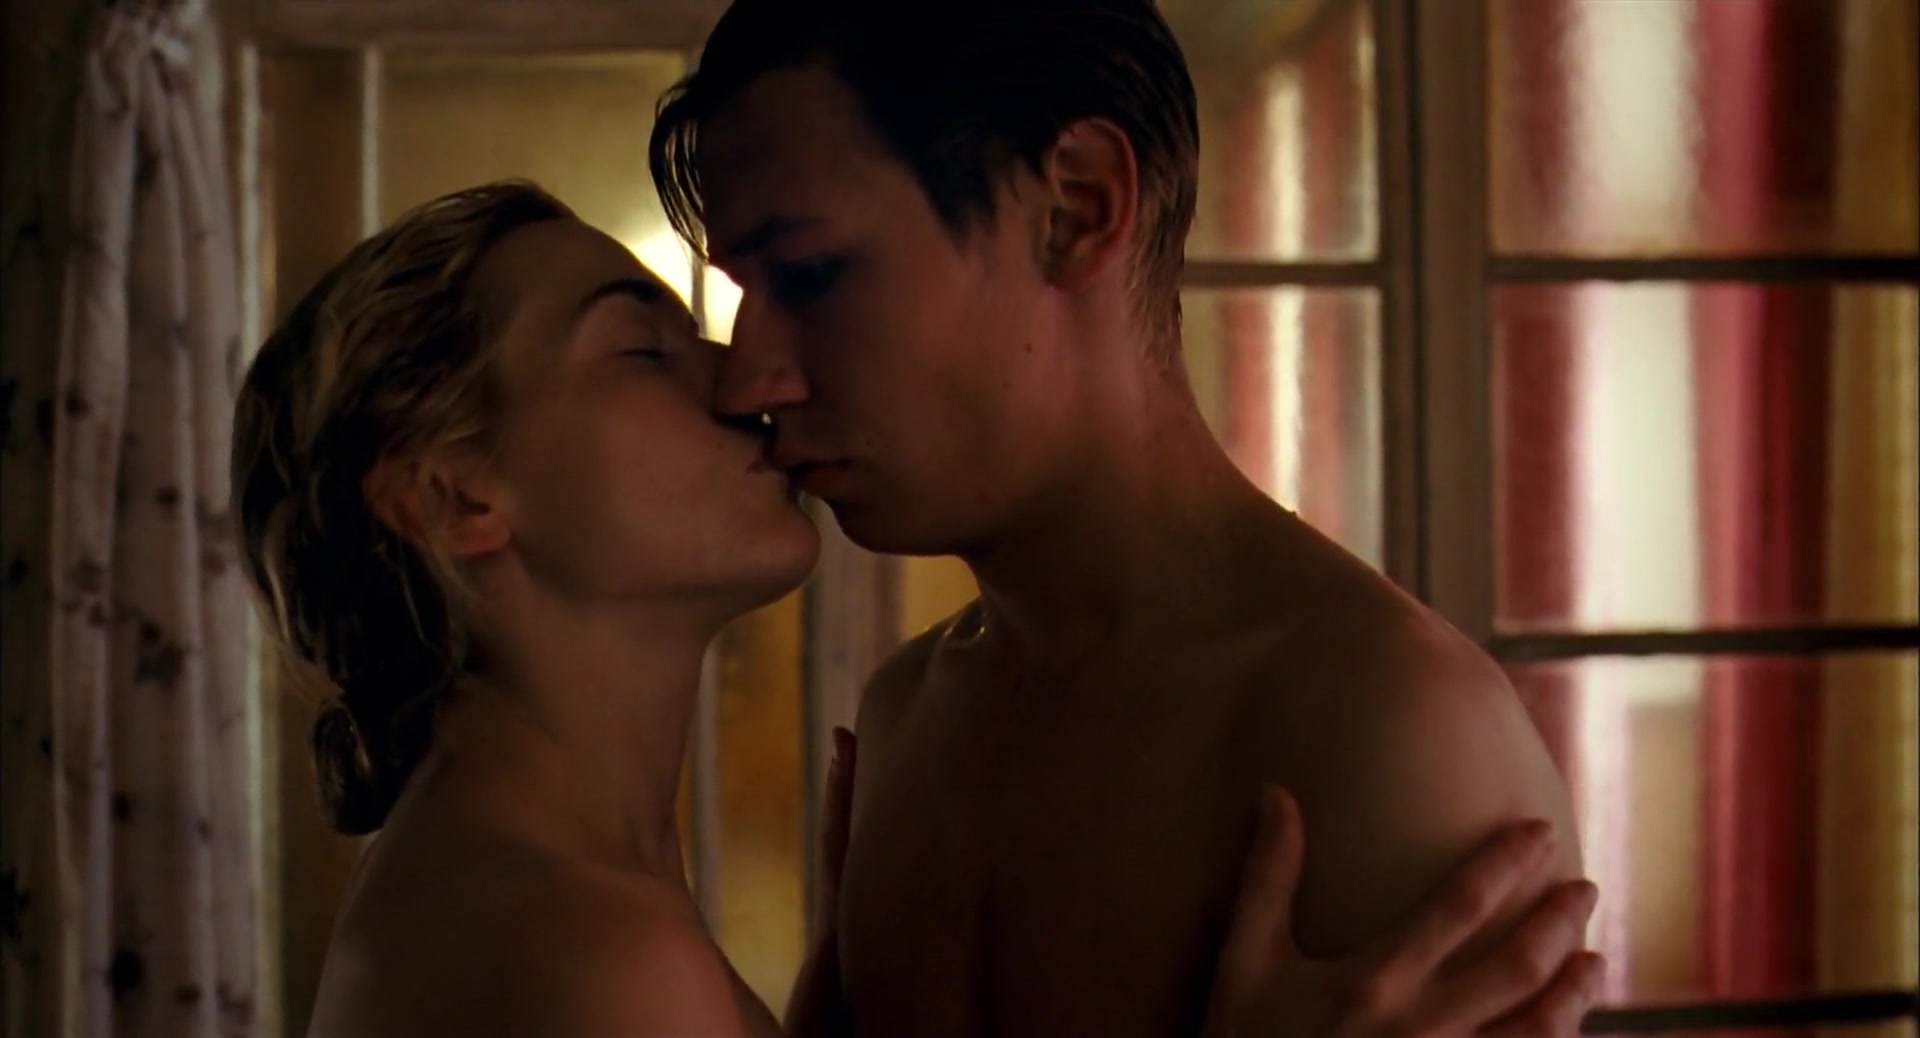 Kate Winslet - Kate Winslet nude â€“ The Reader (2008) Video Â» Best Sexy ...